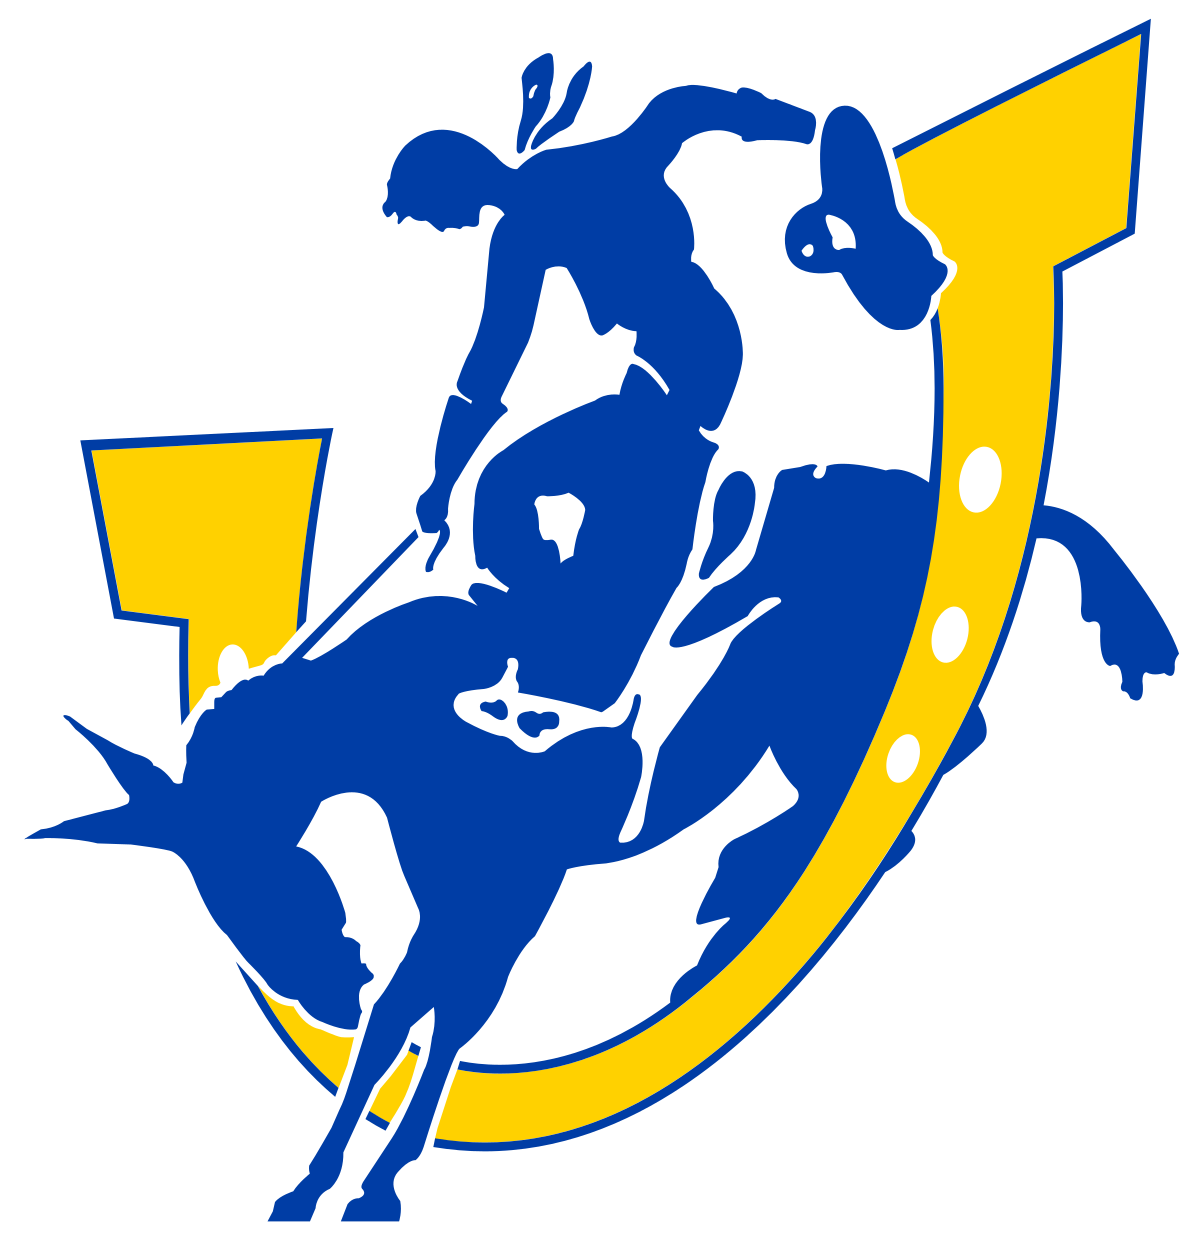 The OFFICIAL Twitter account of Southern Arkansas University Women’s Basketball! #SAU #Muleriders #RIDEwithUS